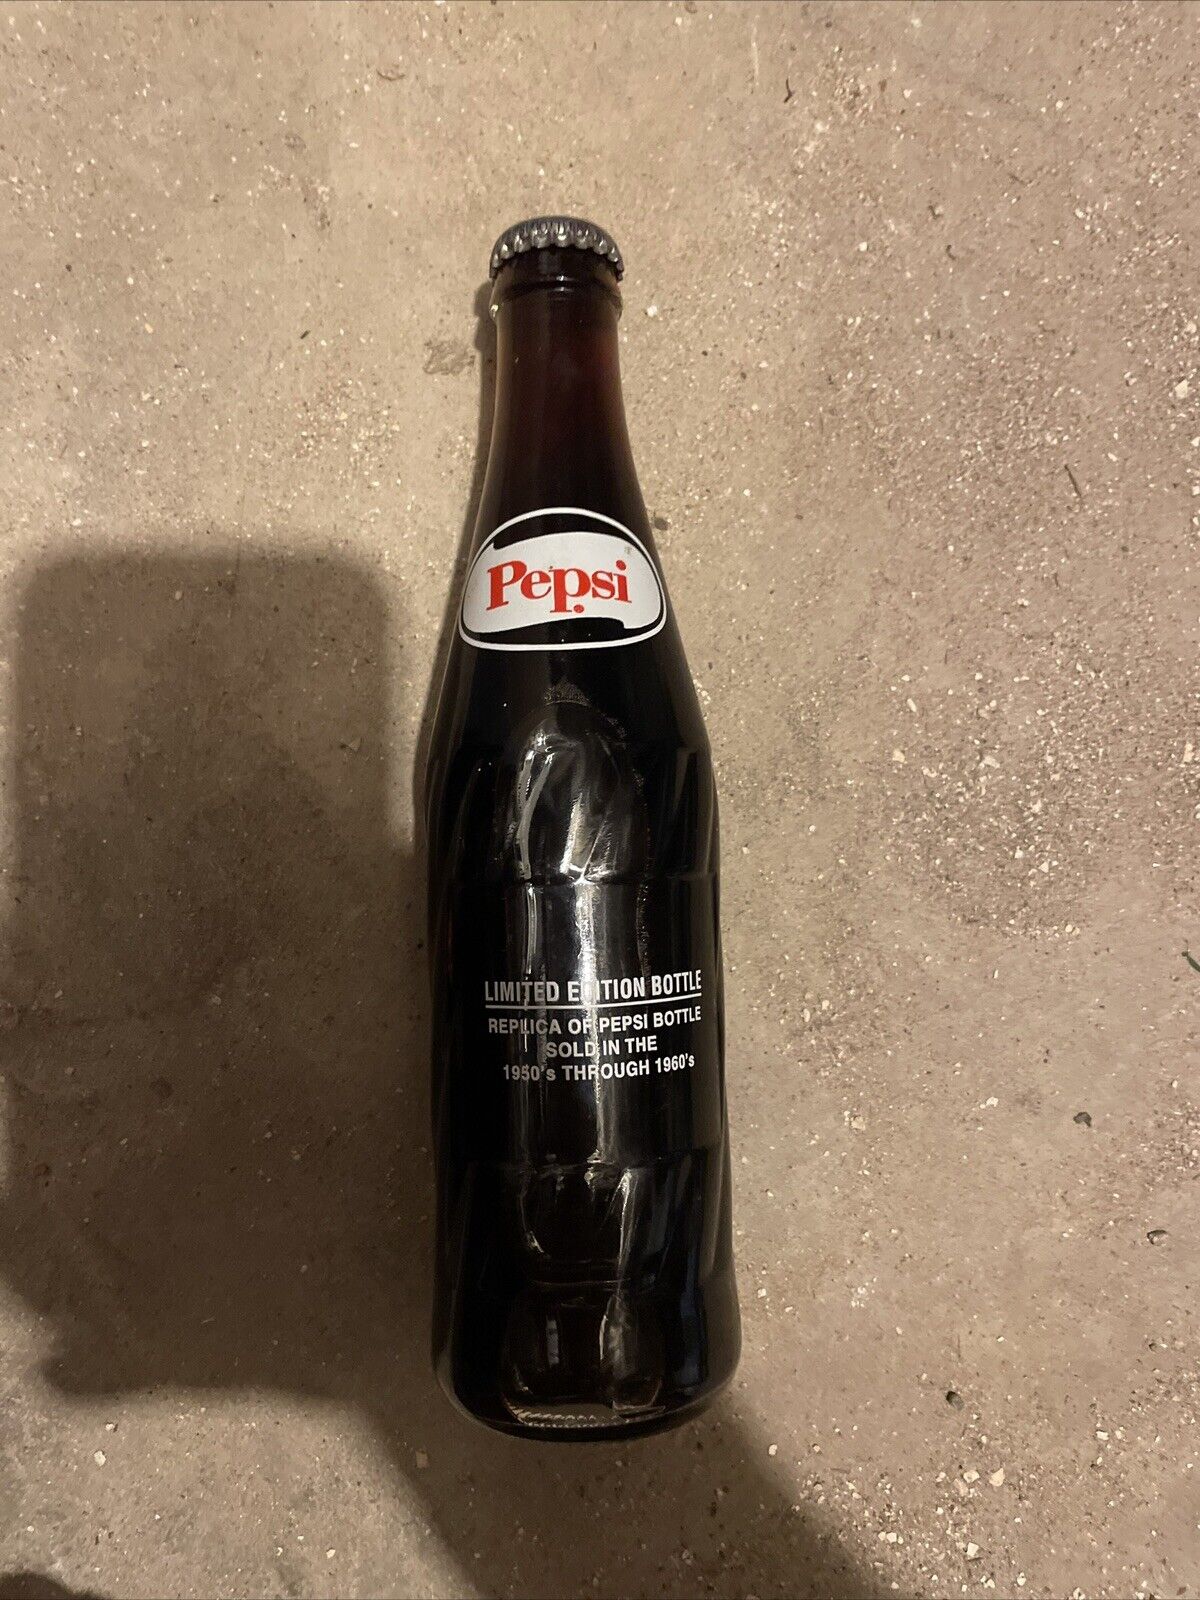 Limited edition Vintage Pepsi-Cola sold in the 1950s to 1960s